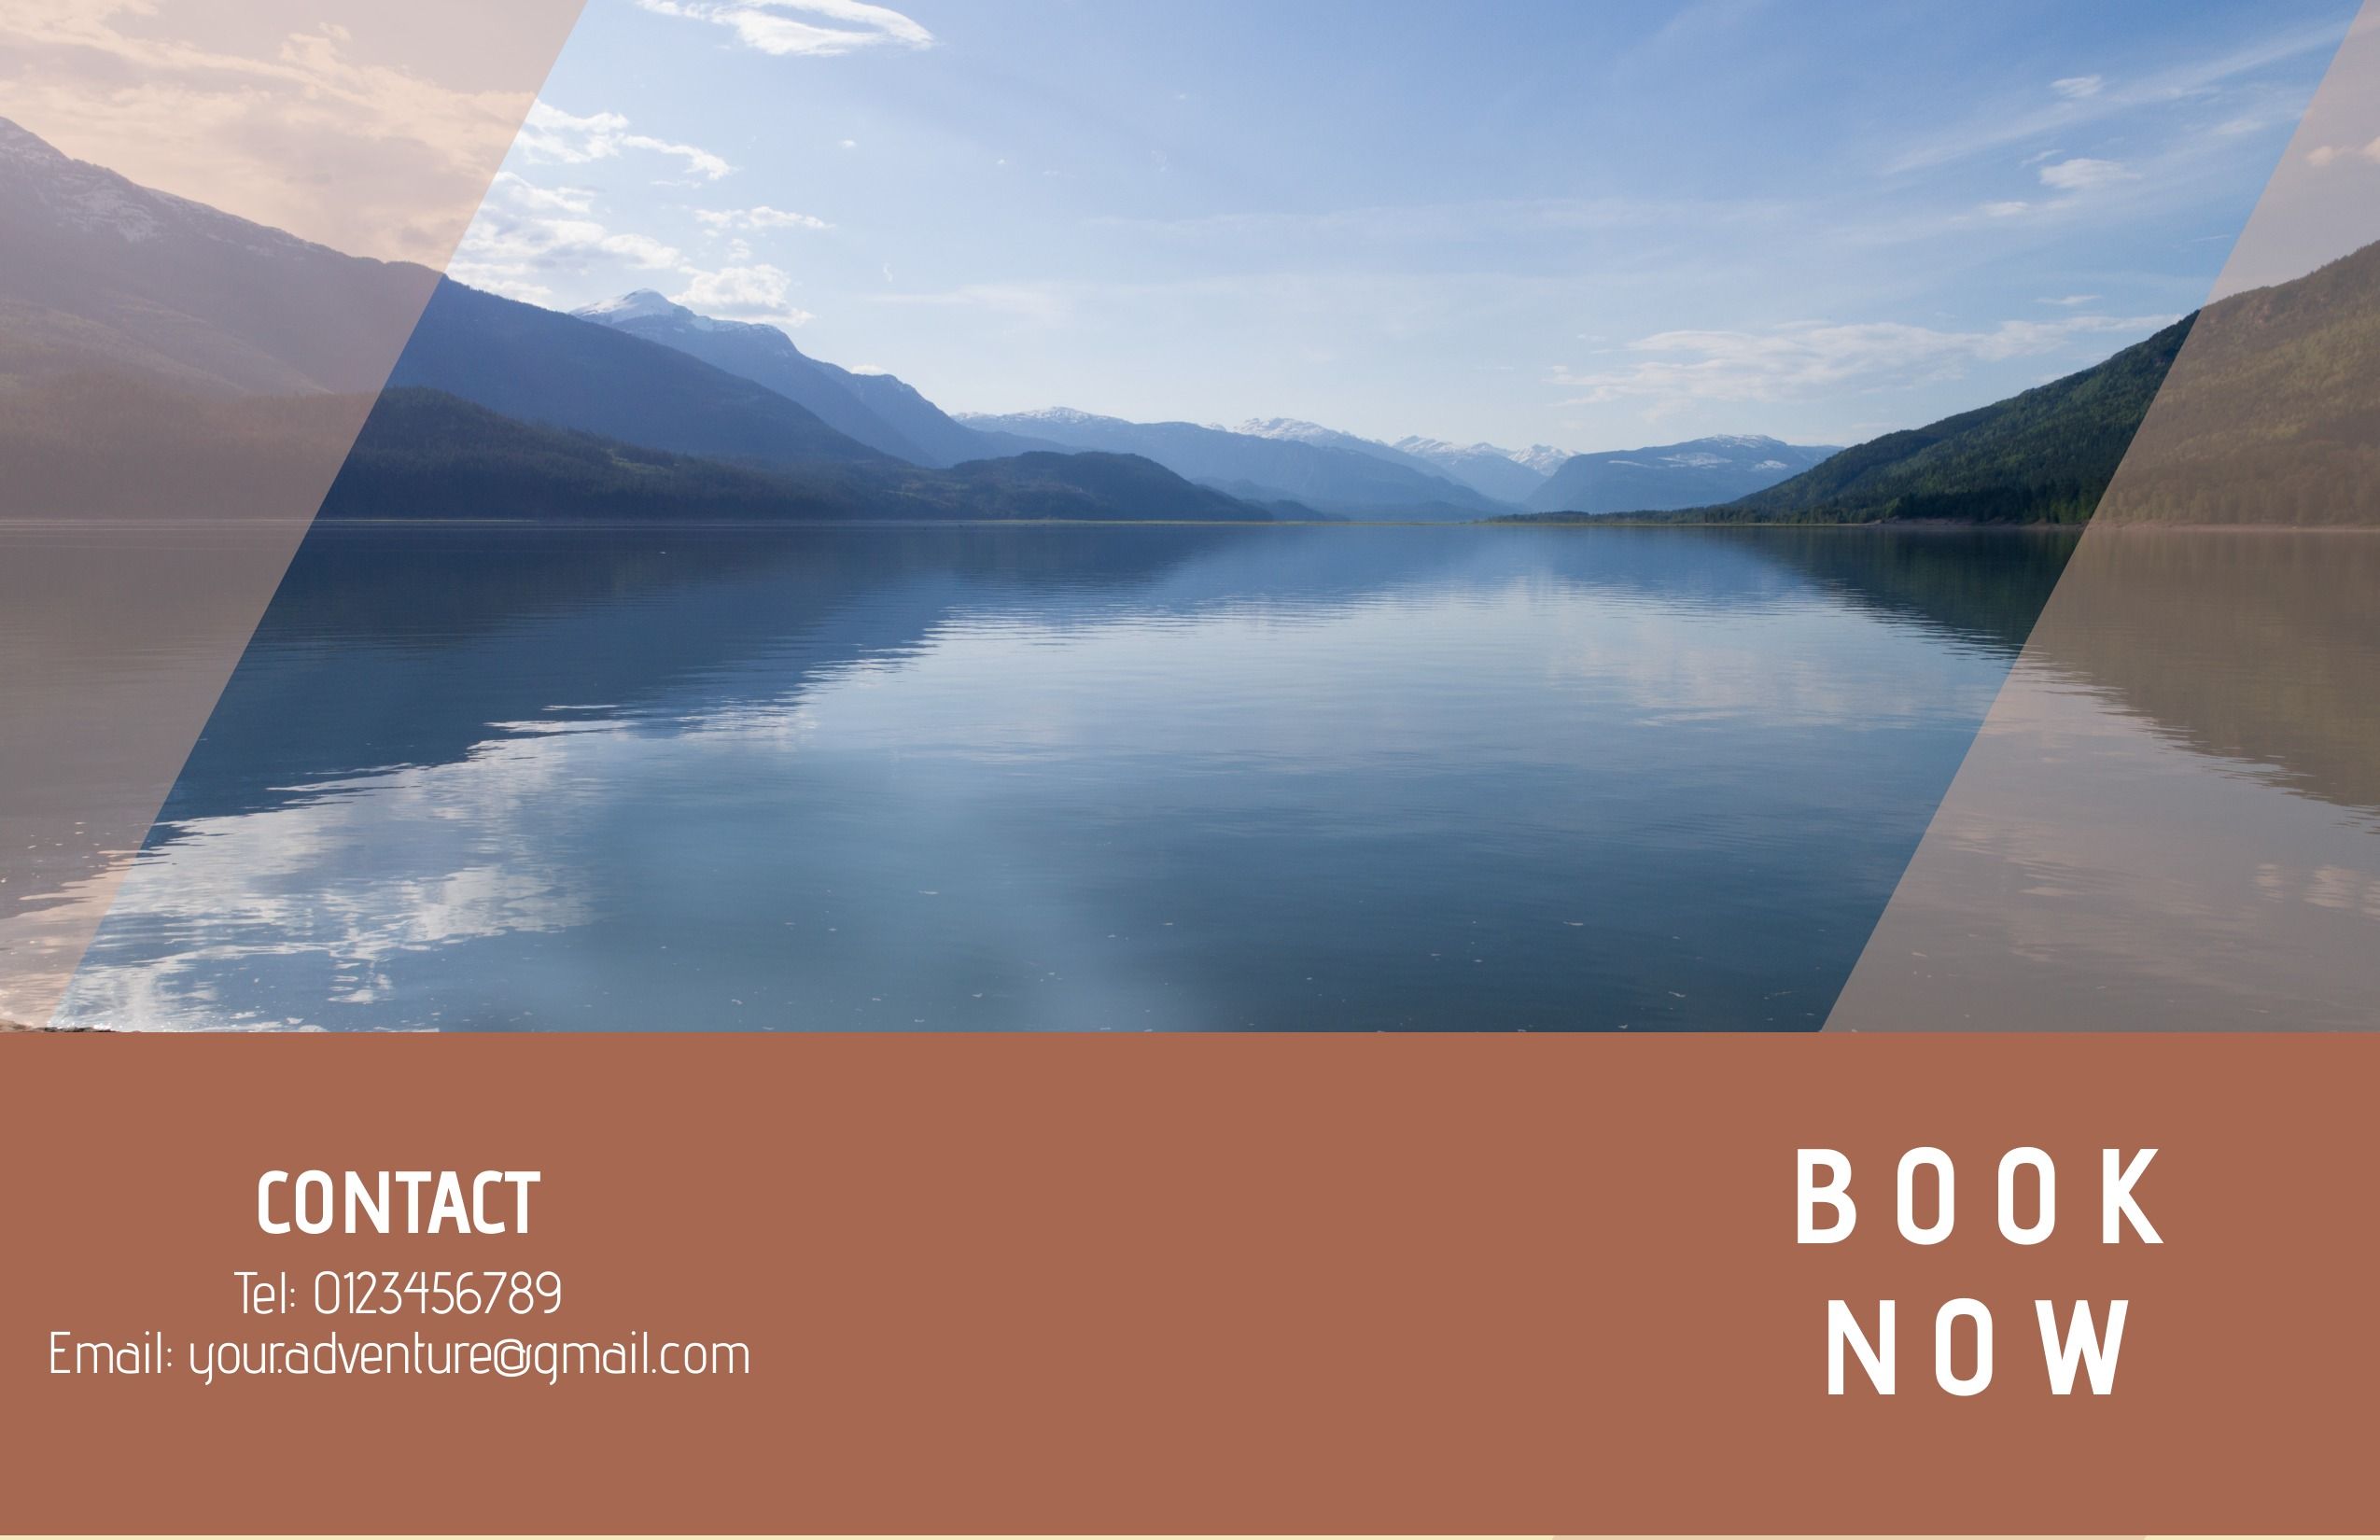 Flyer for a travel agency with an image of a lake and mountains and contact information at the bottom - How is the rule of thirds used in graphic design - Image